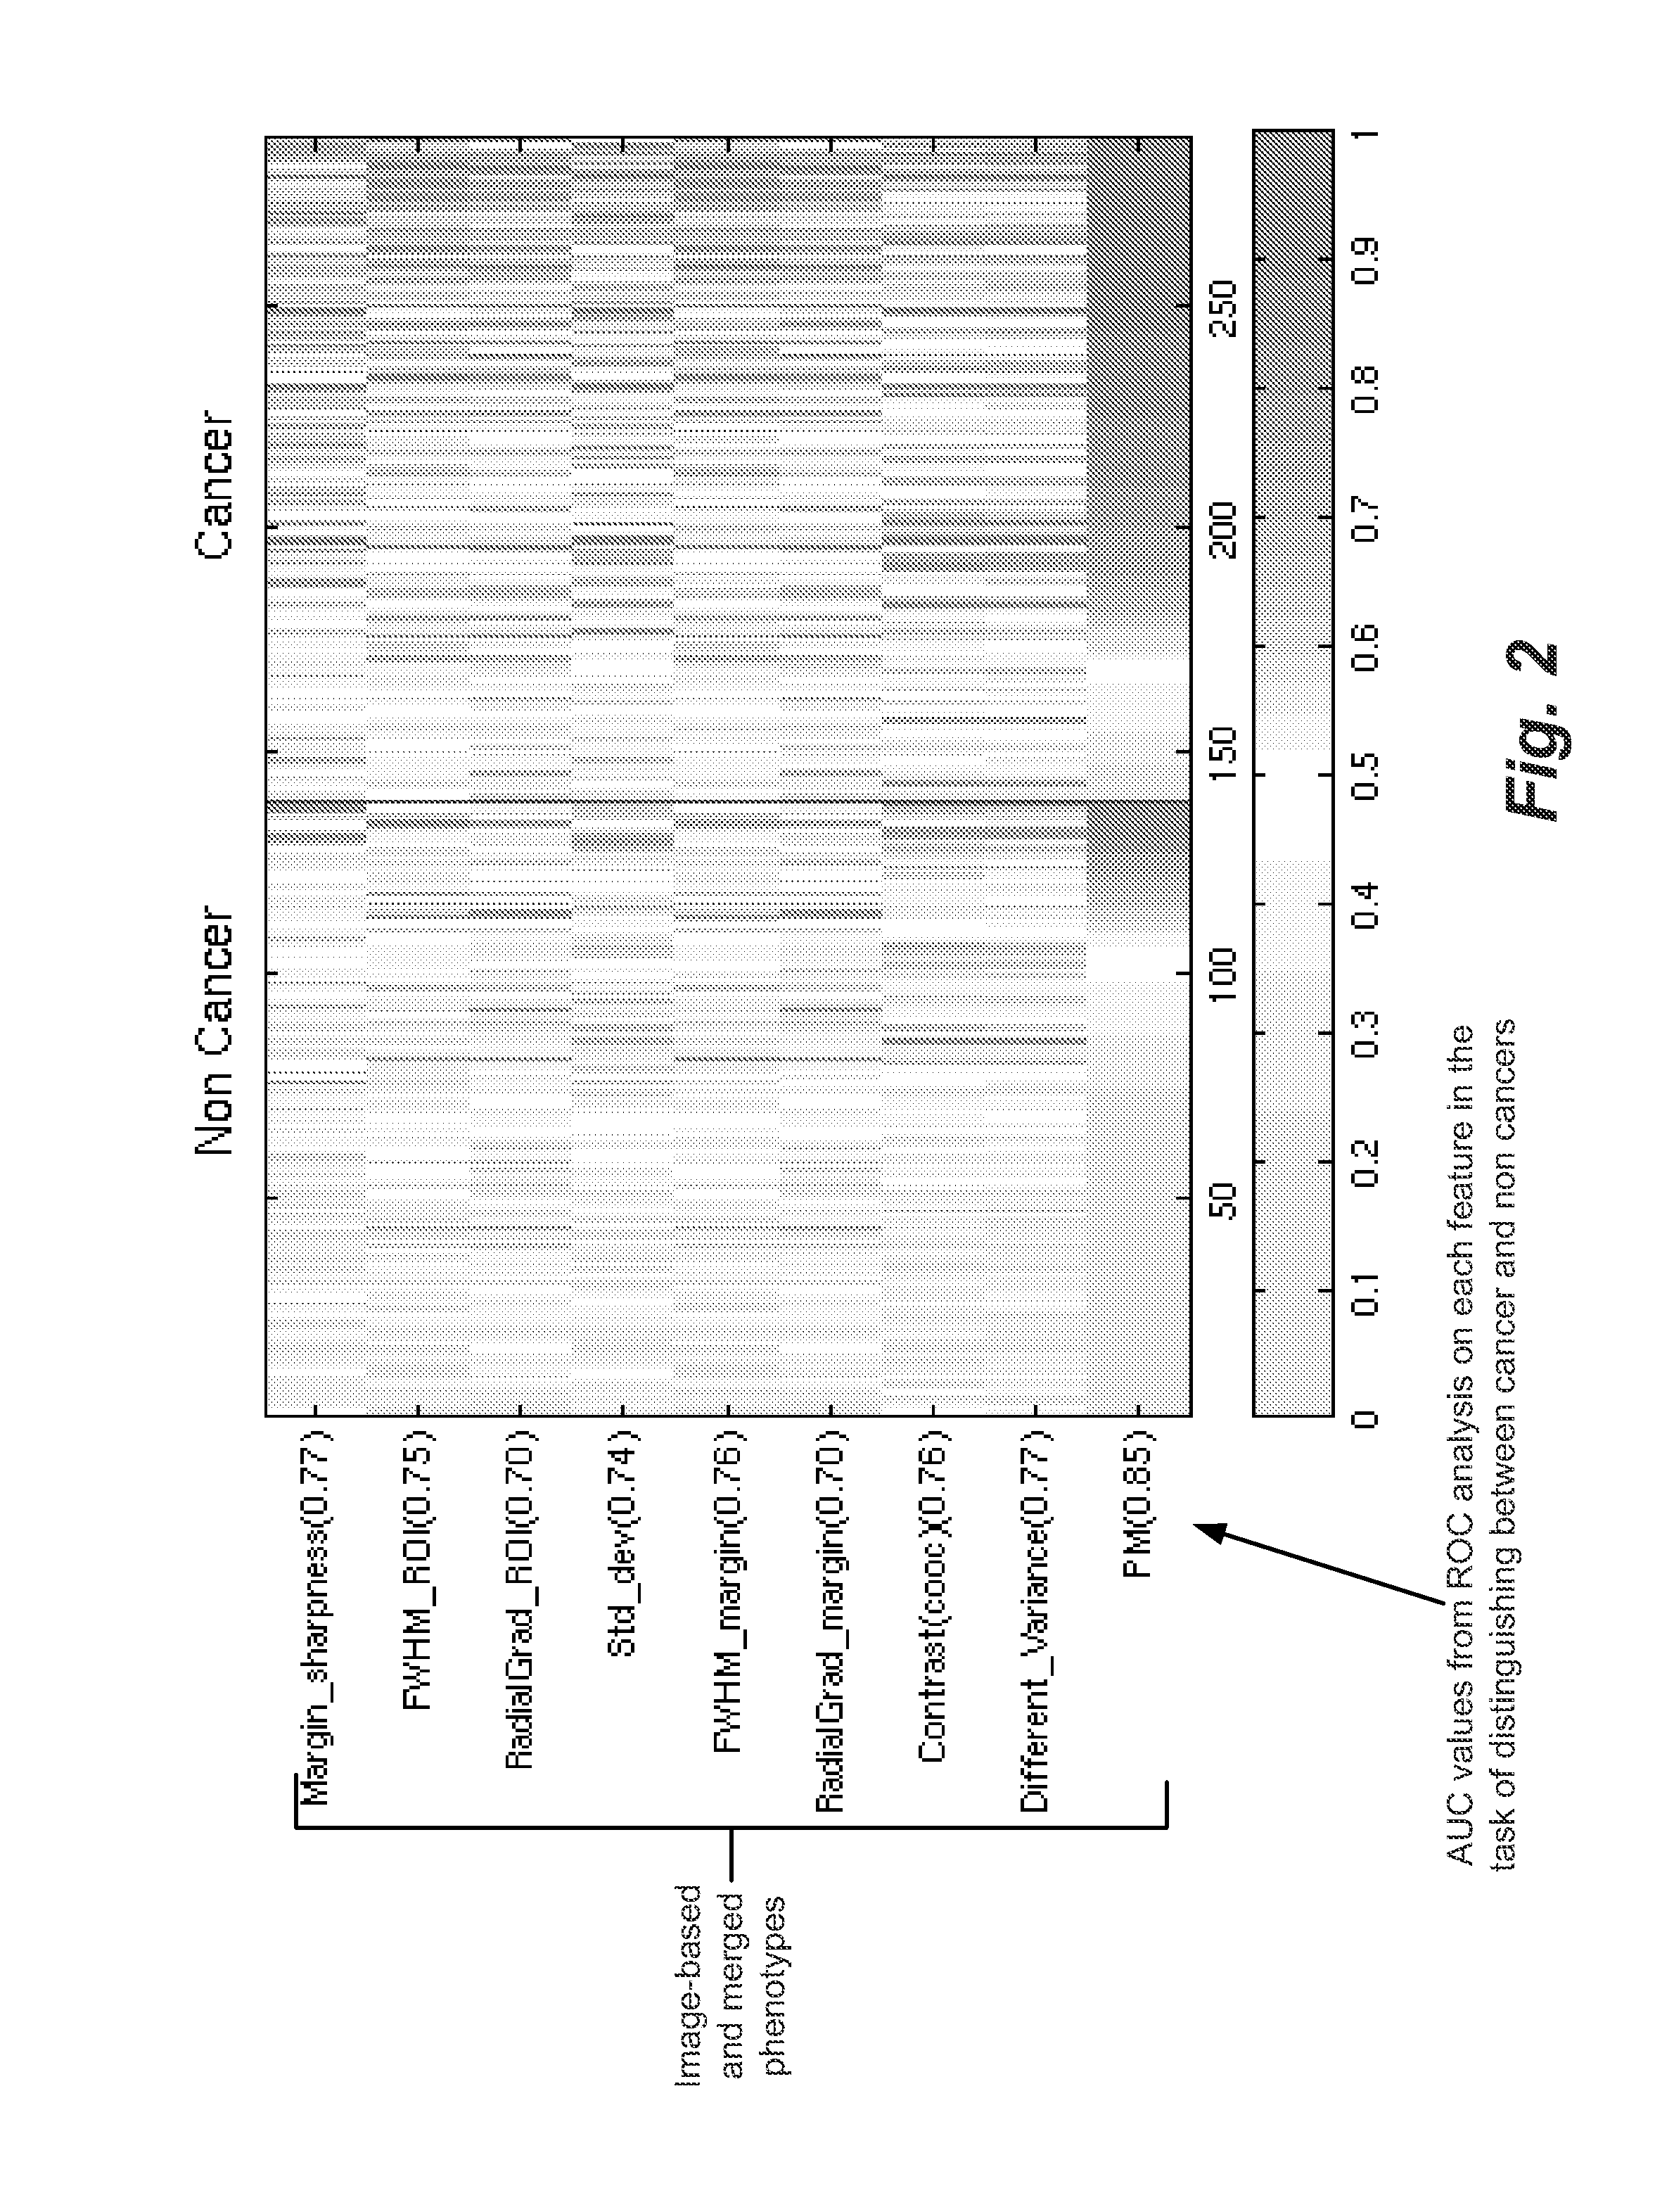 Method, system, software and medium for advanced image-based arrays for analysis and display of biomedical information